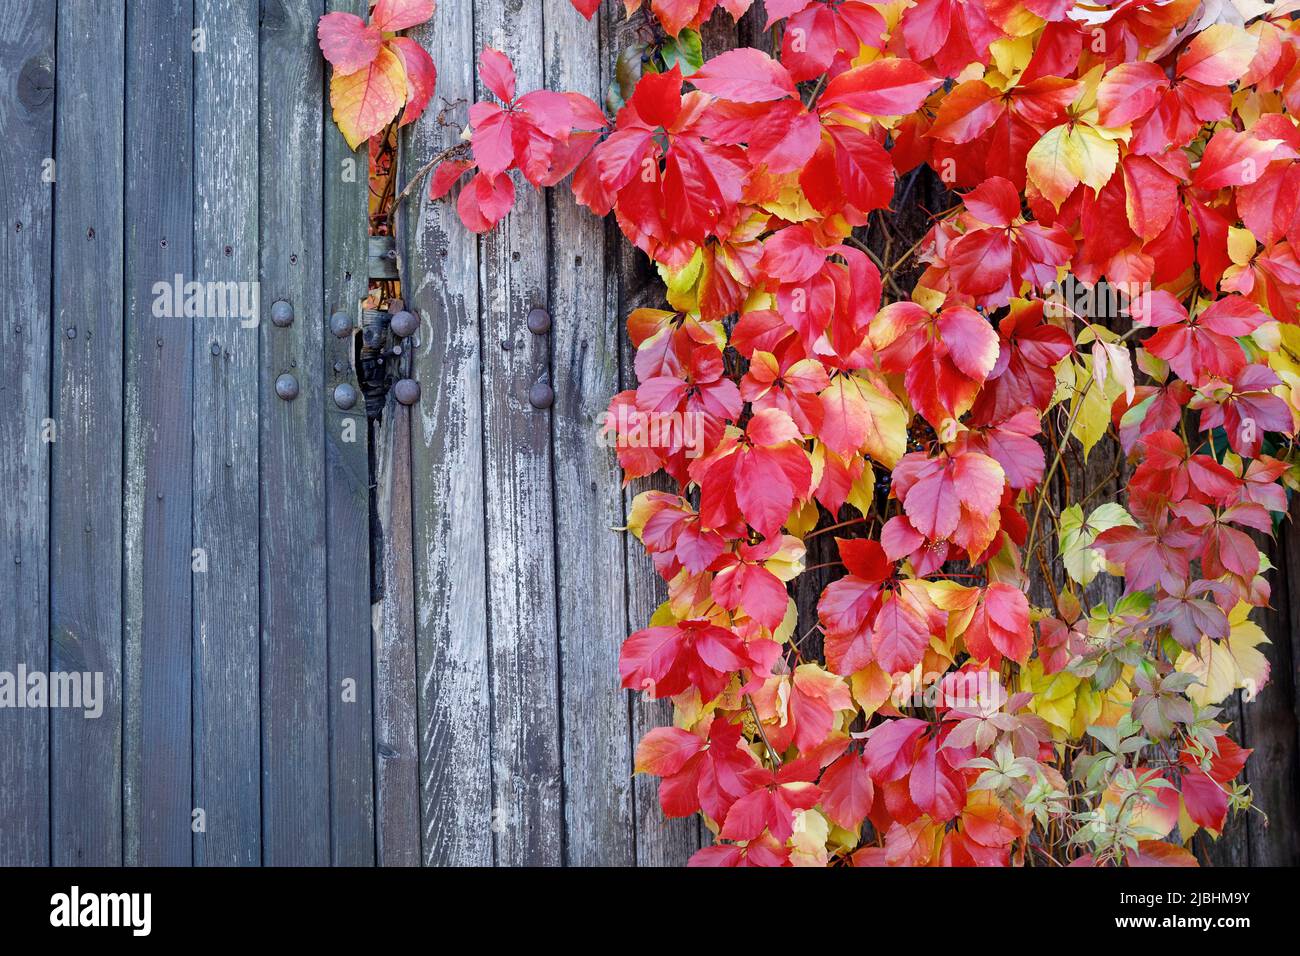 Beautiful plant with red autumn leaves on wooden old board fence. There is free space for text in the image. Stock Photo